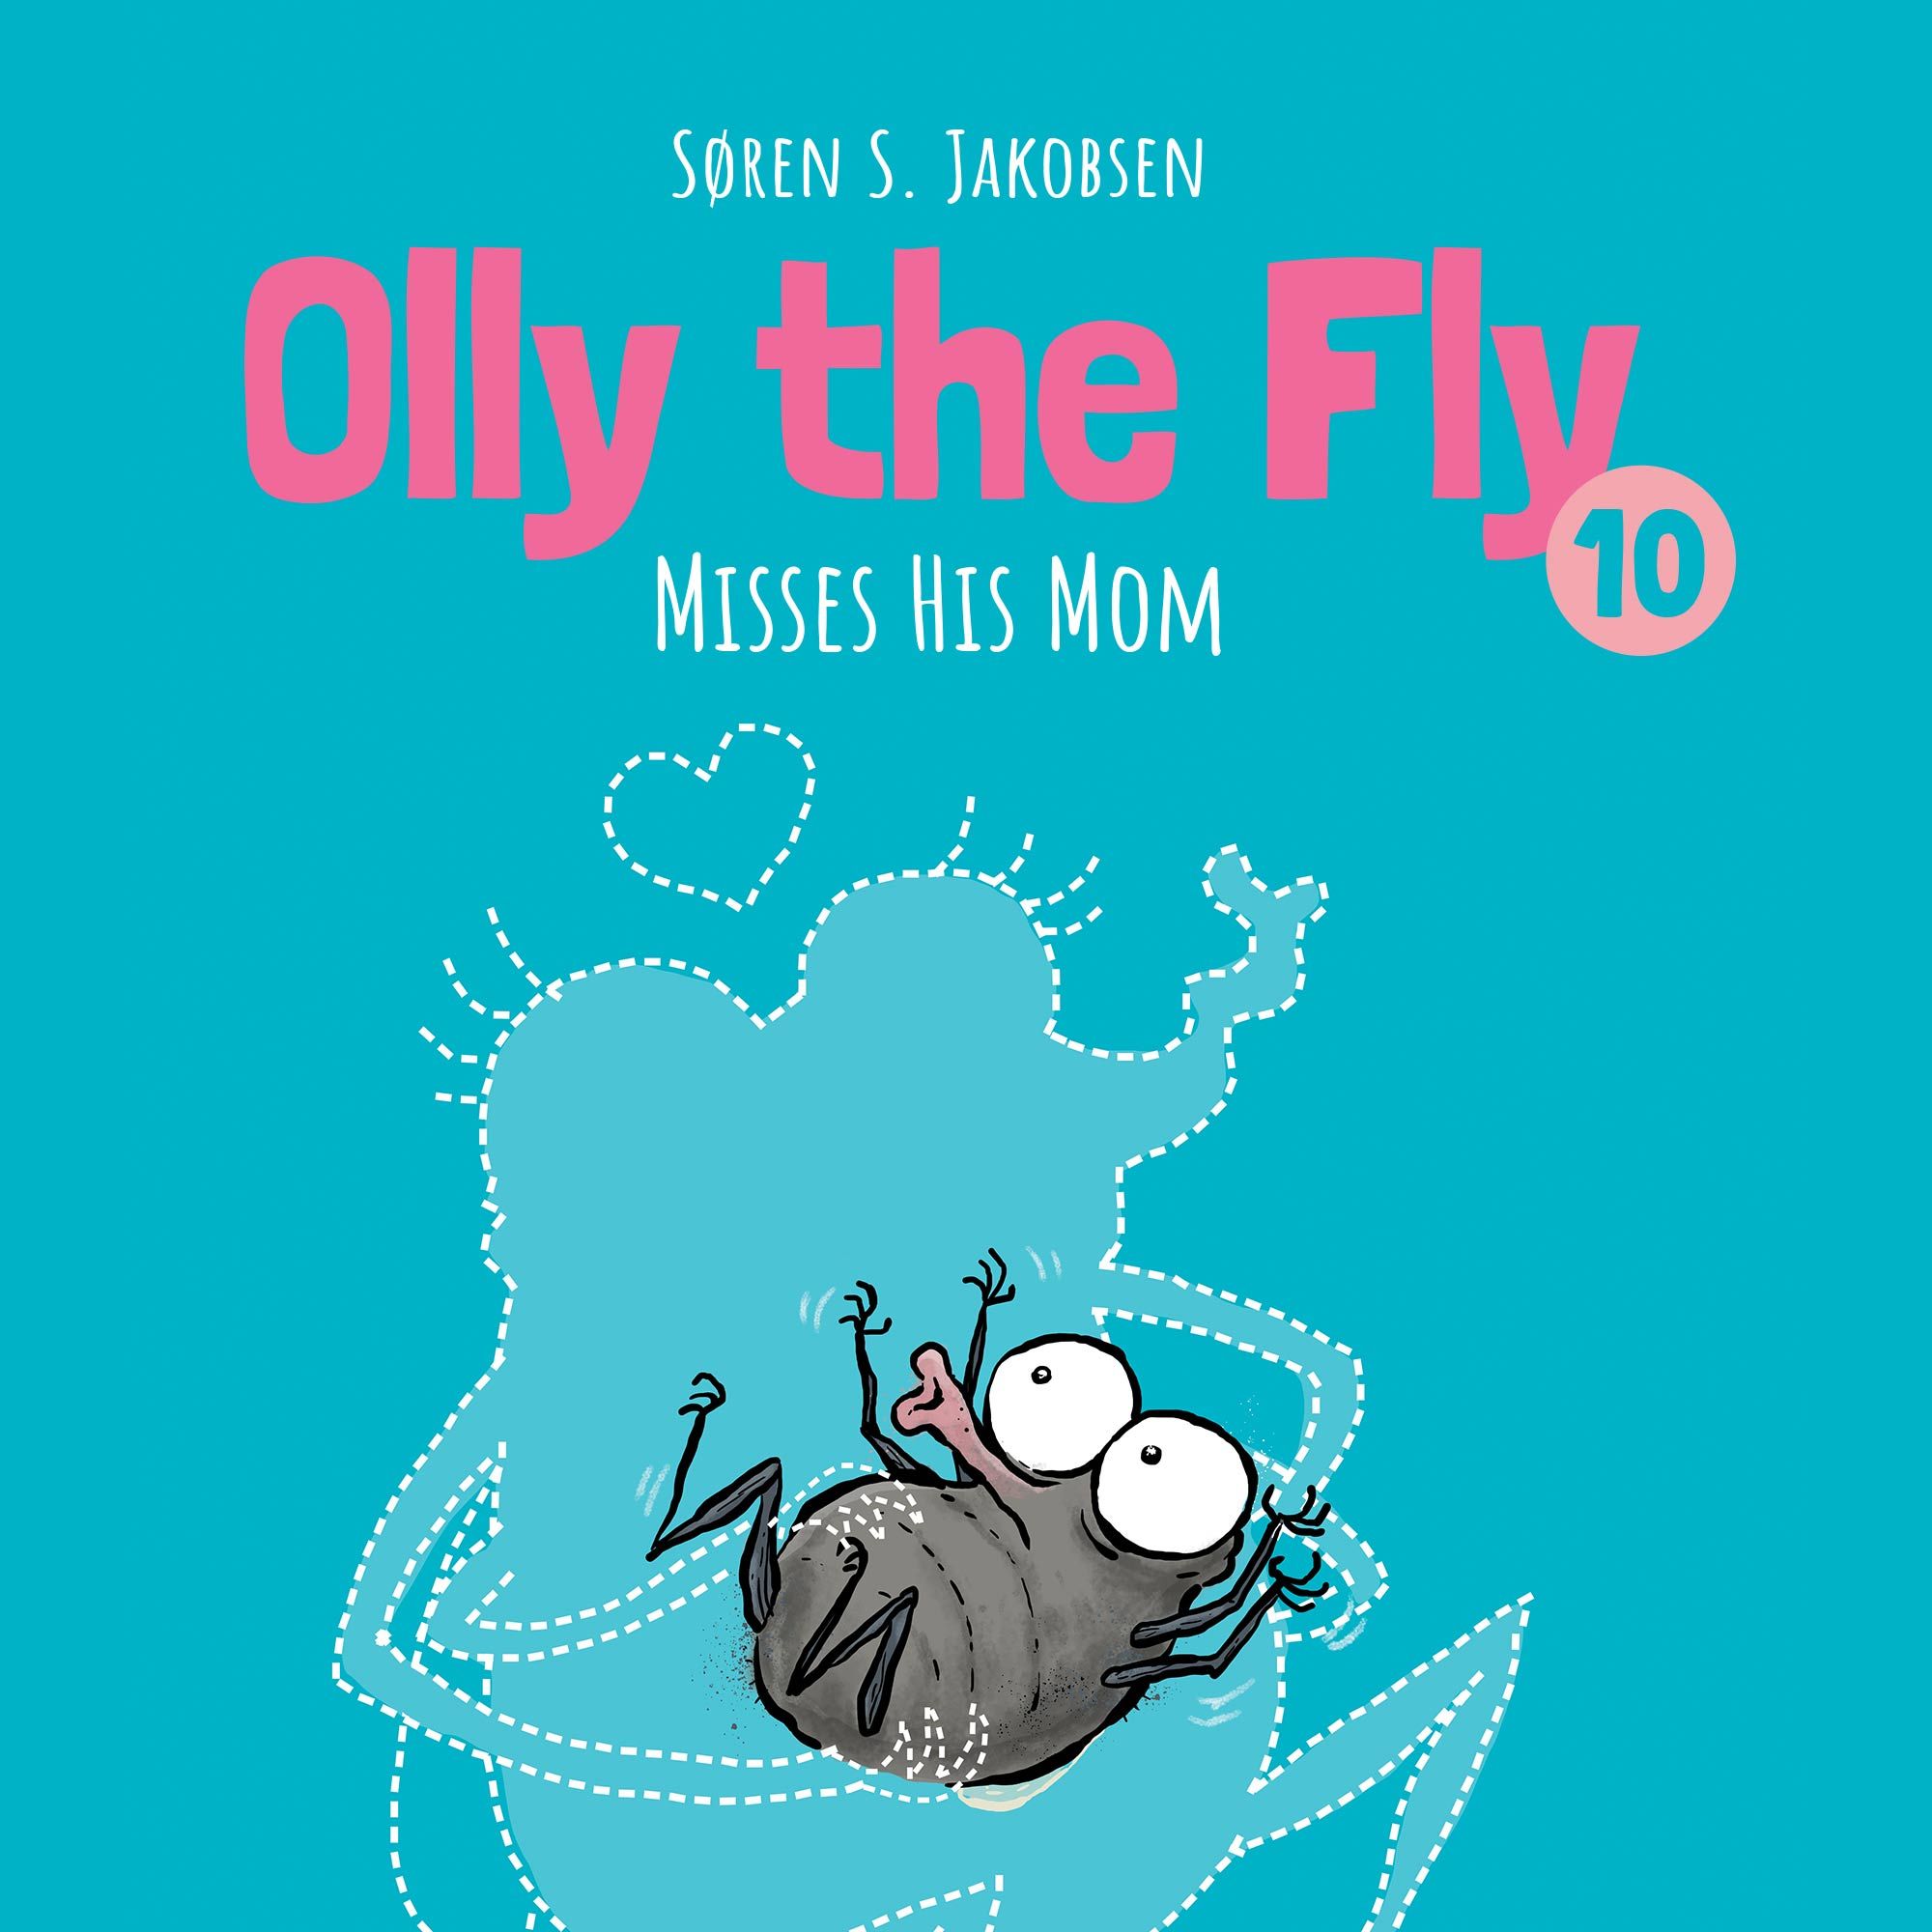 Olly the Fly #10: Olly the Fly Misses His Mom, audiobook by Søren S. Jakobsen